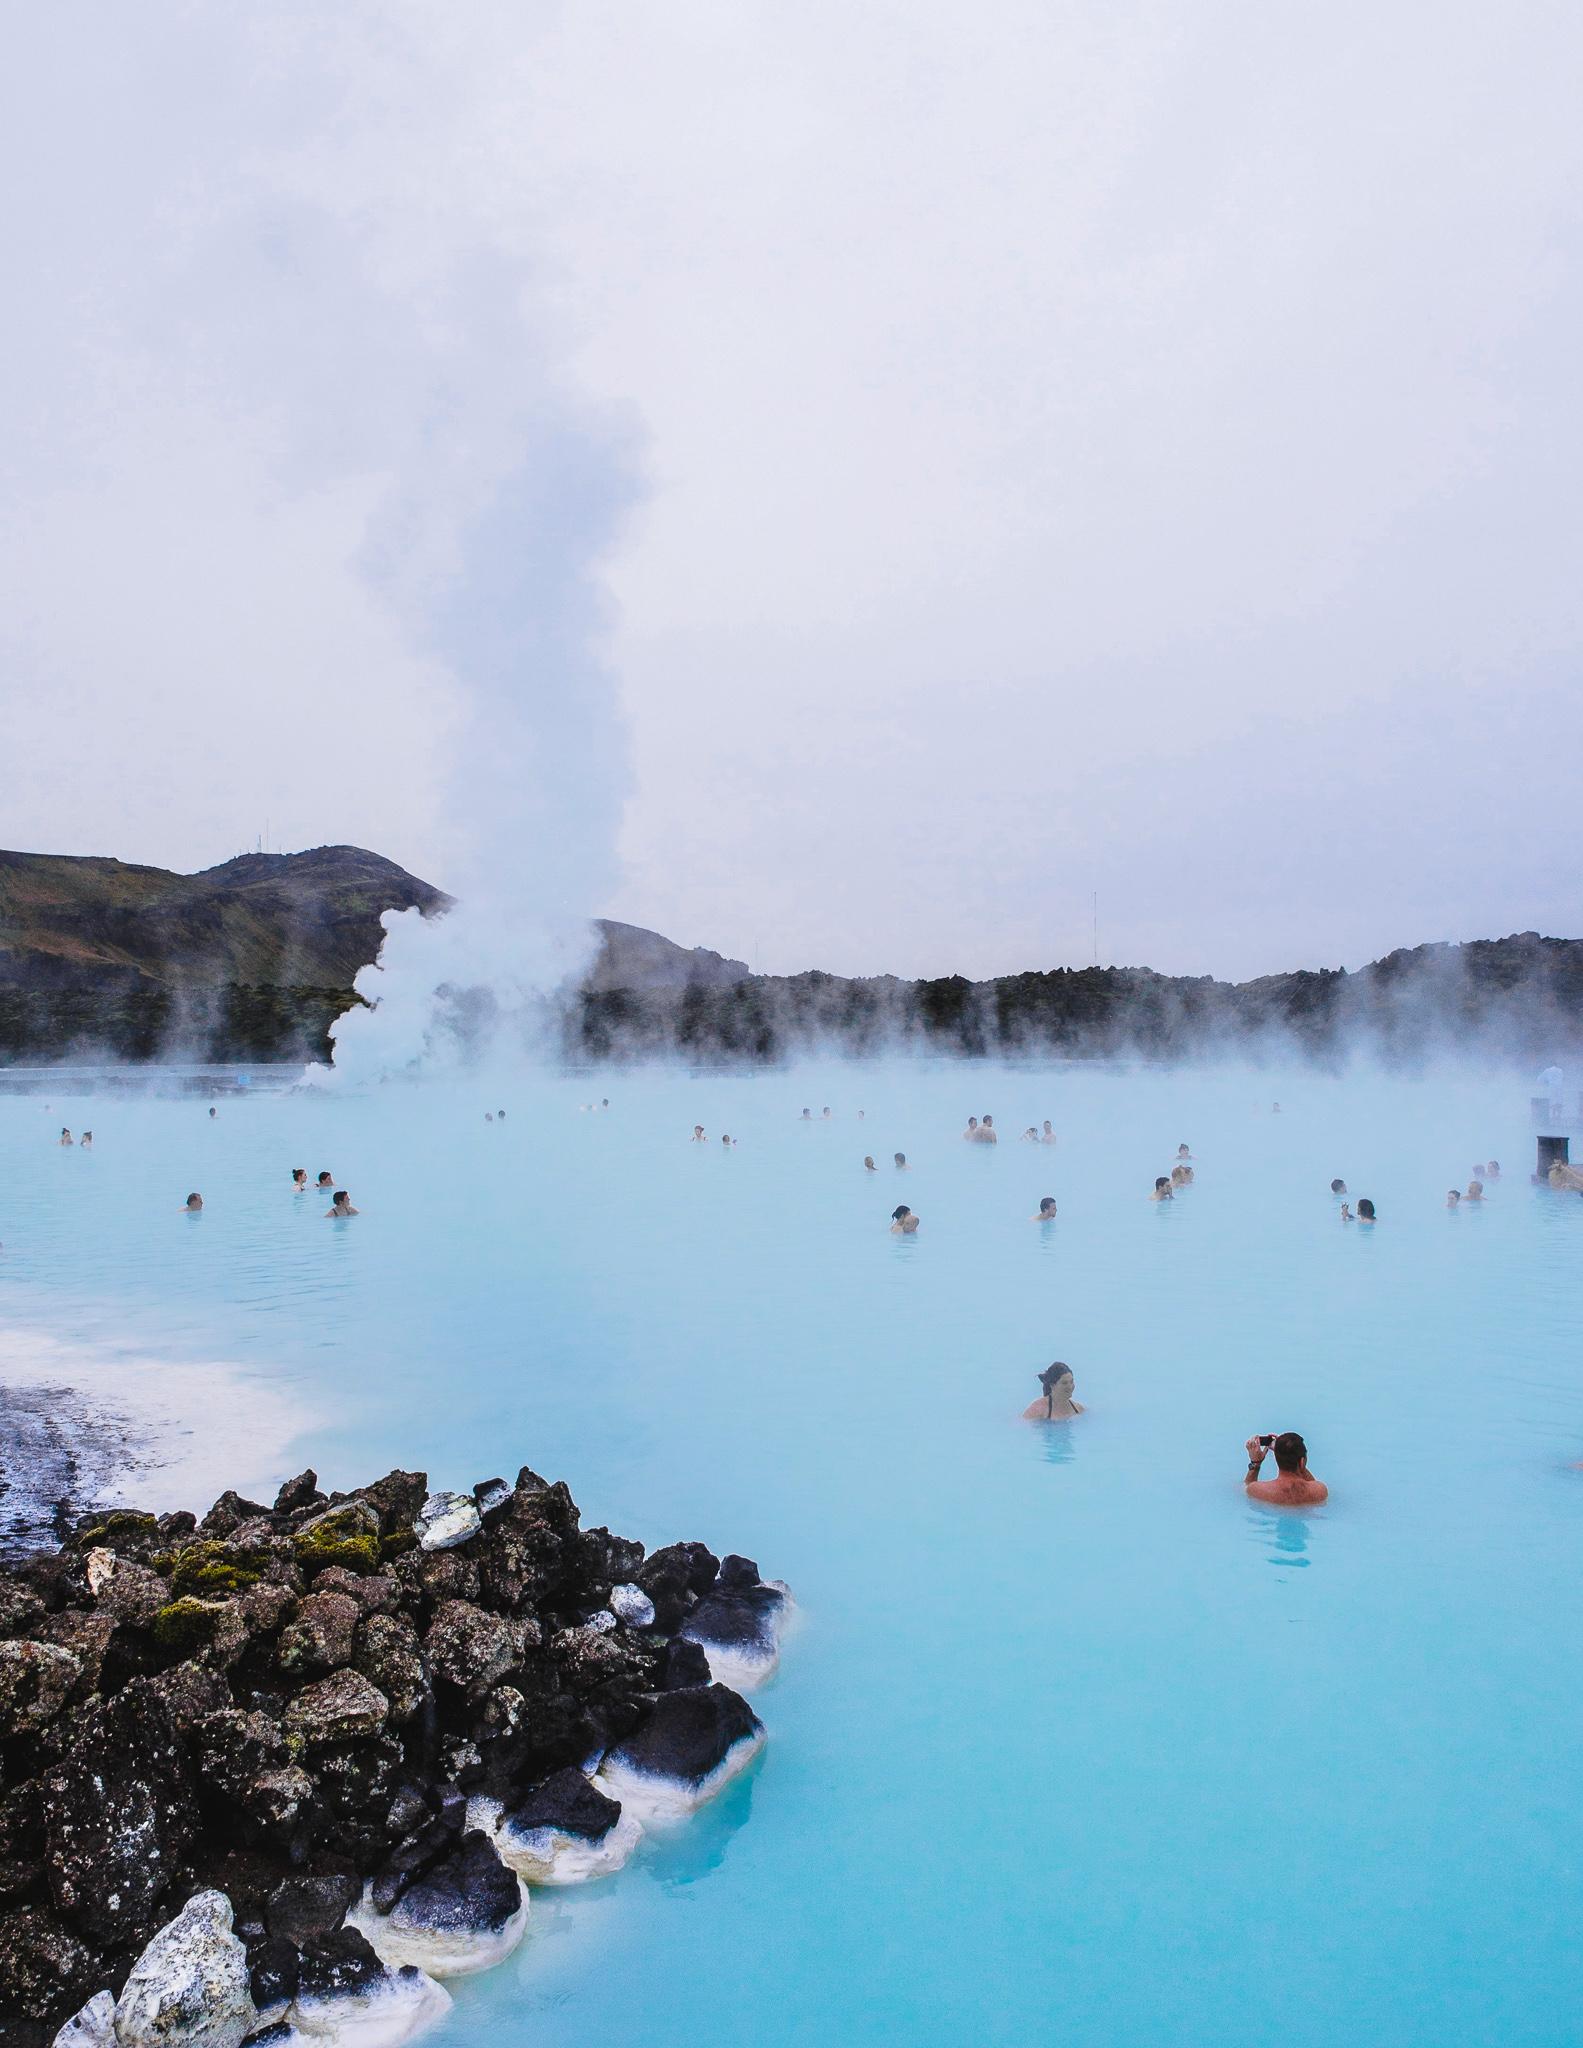 the blue waters and steam of the Blue Lagoon in Iceland